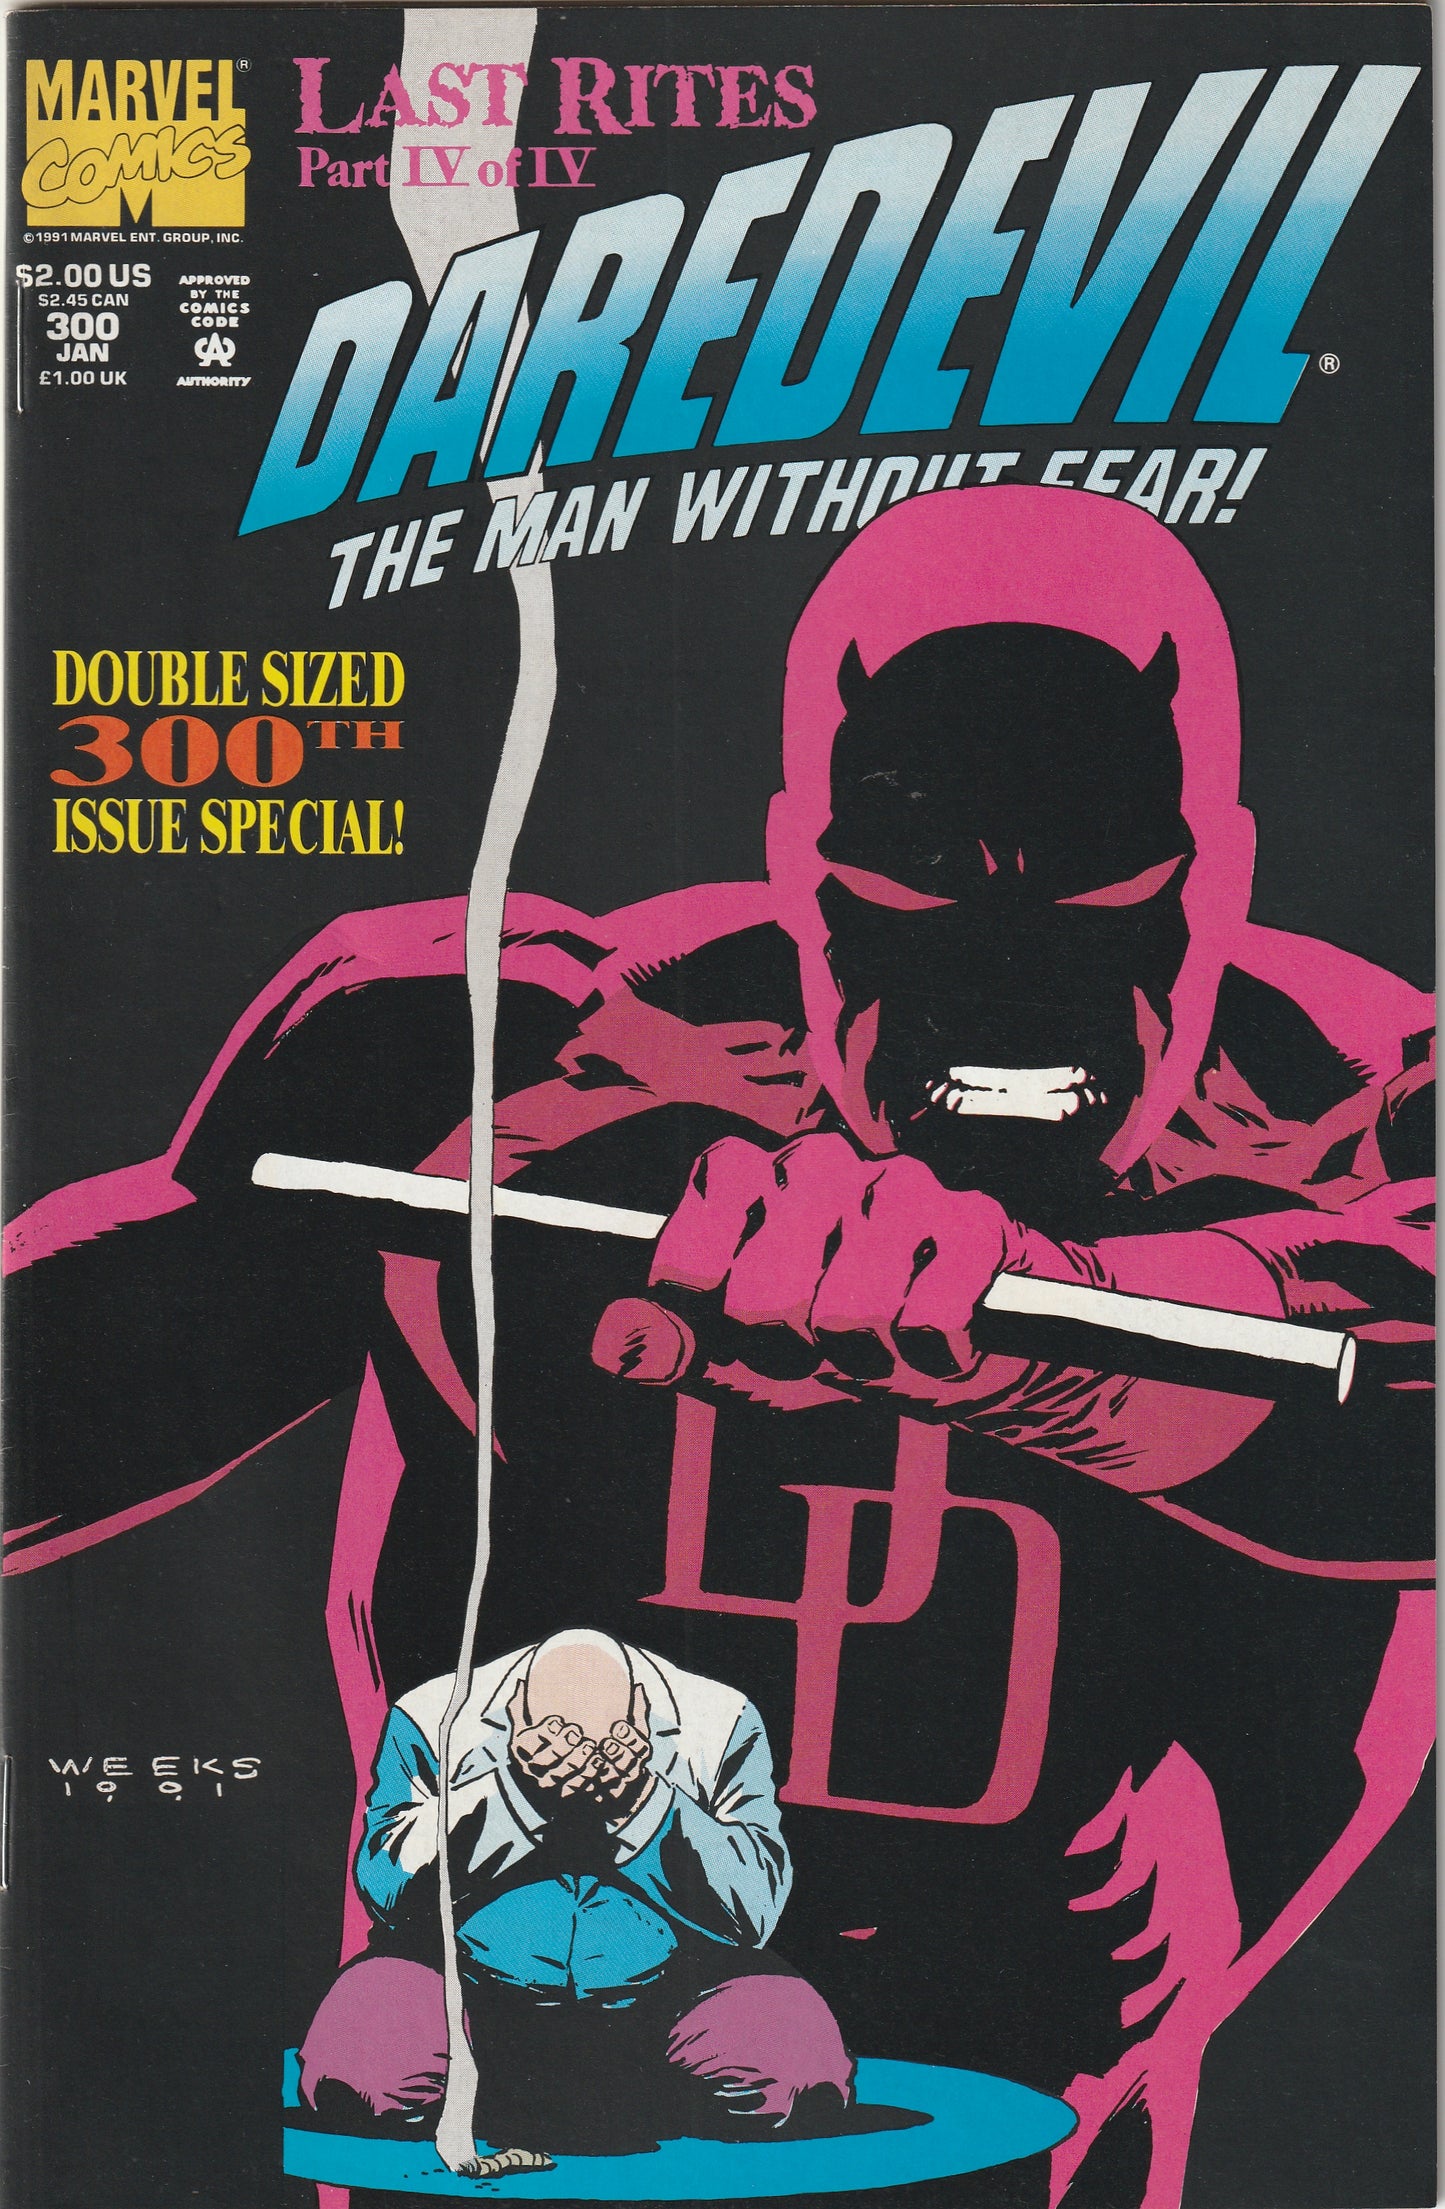 Daredevil #300 (1992) - Double sized issue